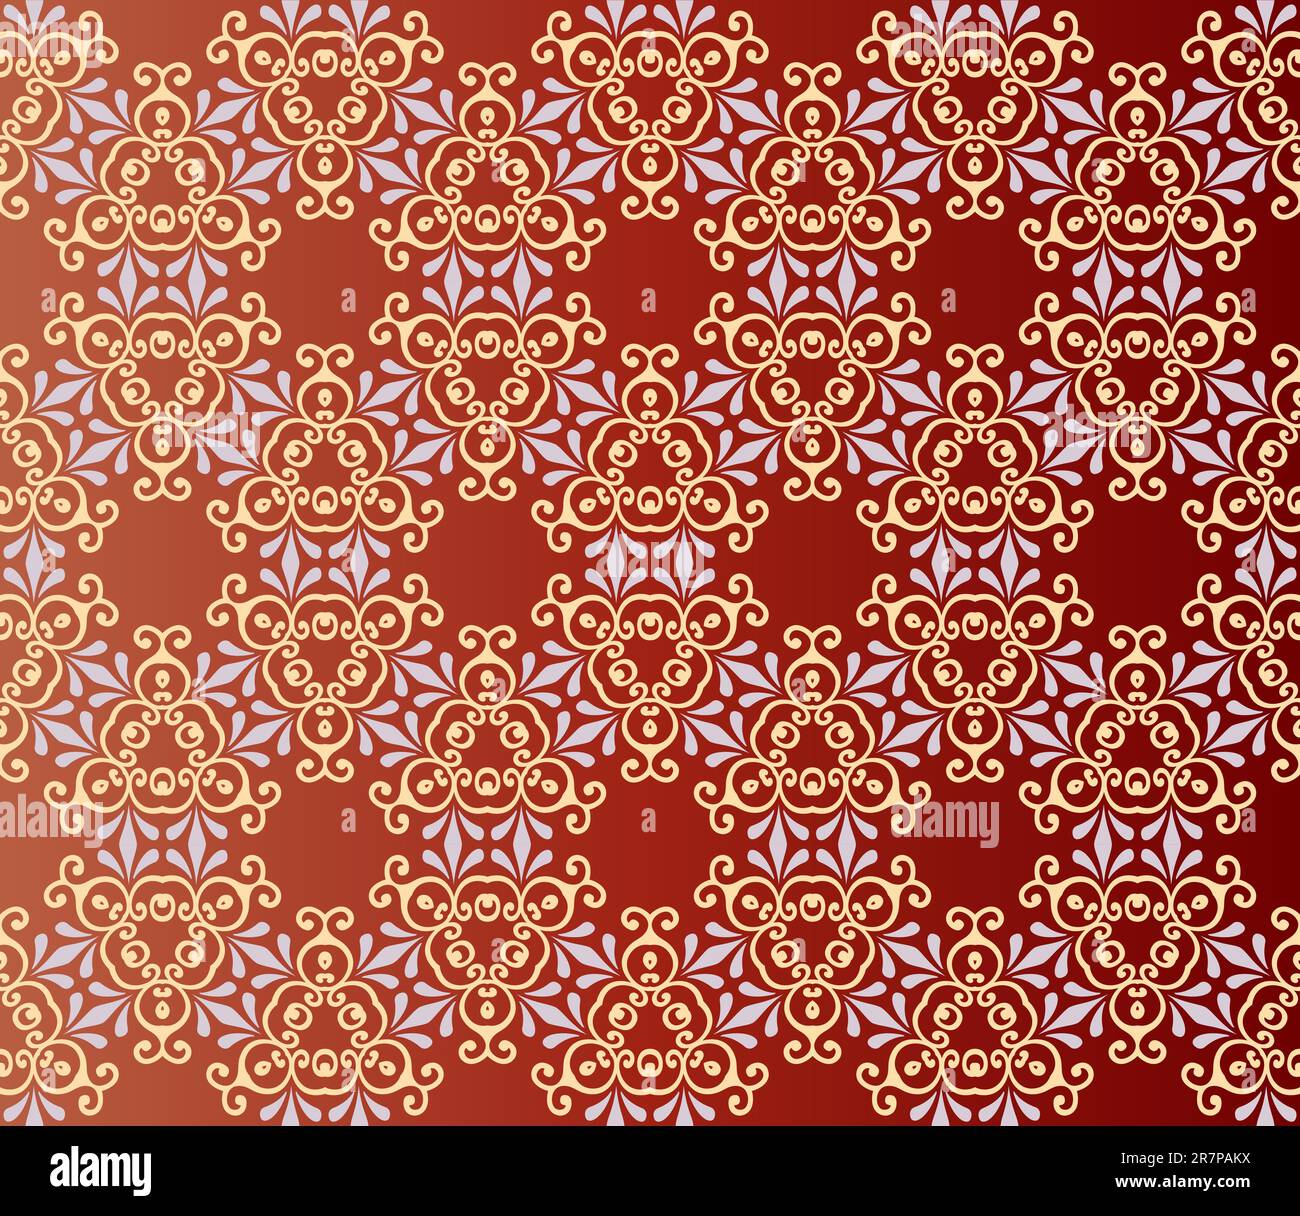 Seamless and elegant Baroque pattern with flowers in brown, orange, grey Stock Vector